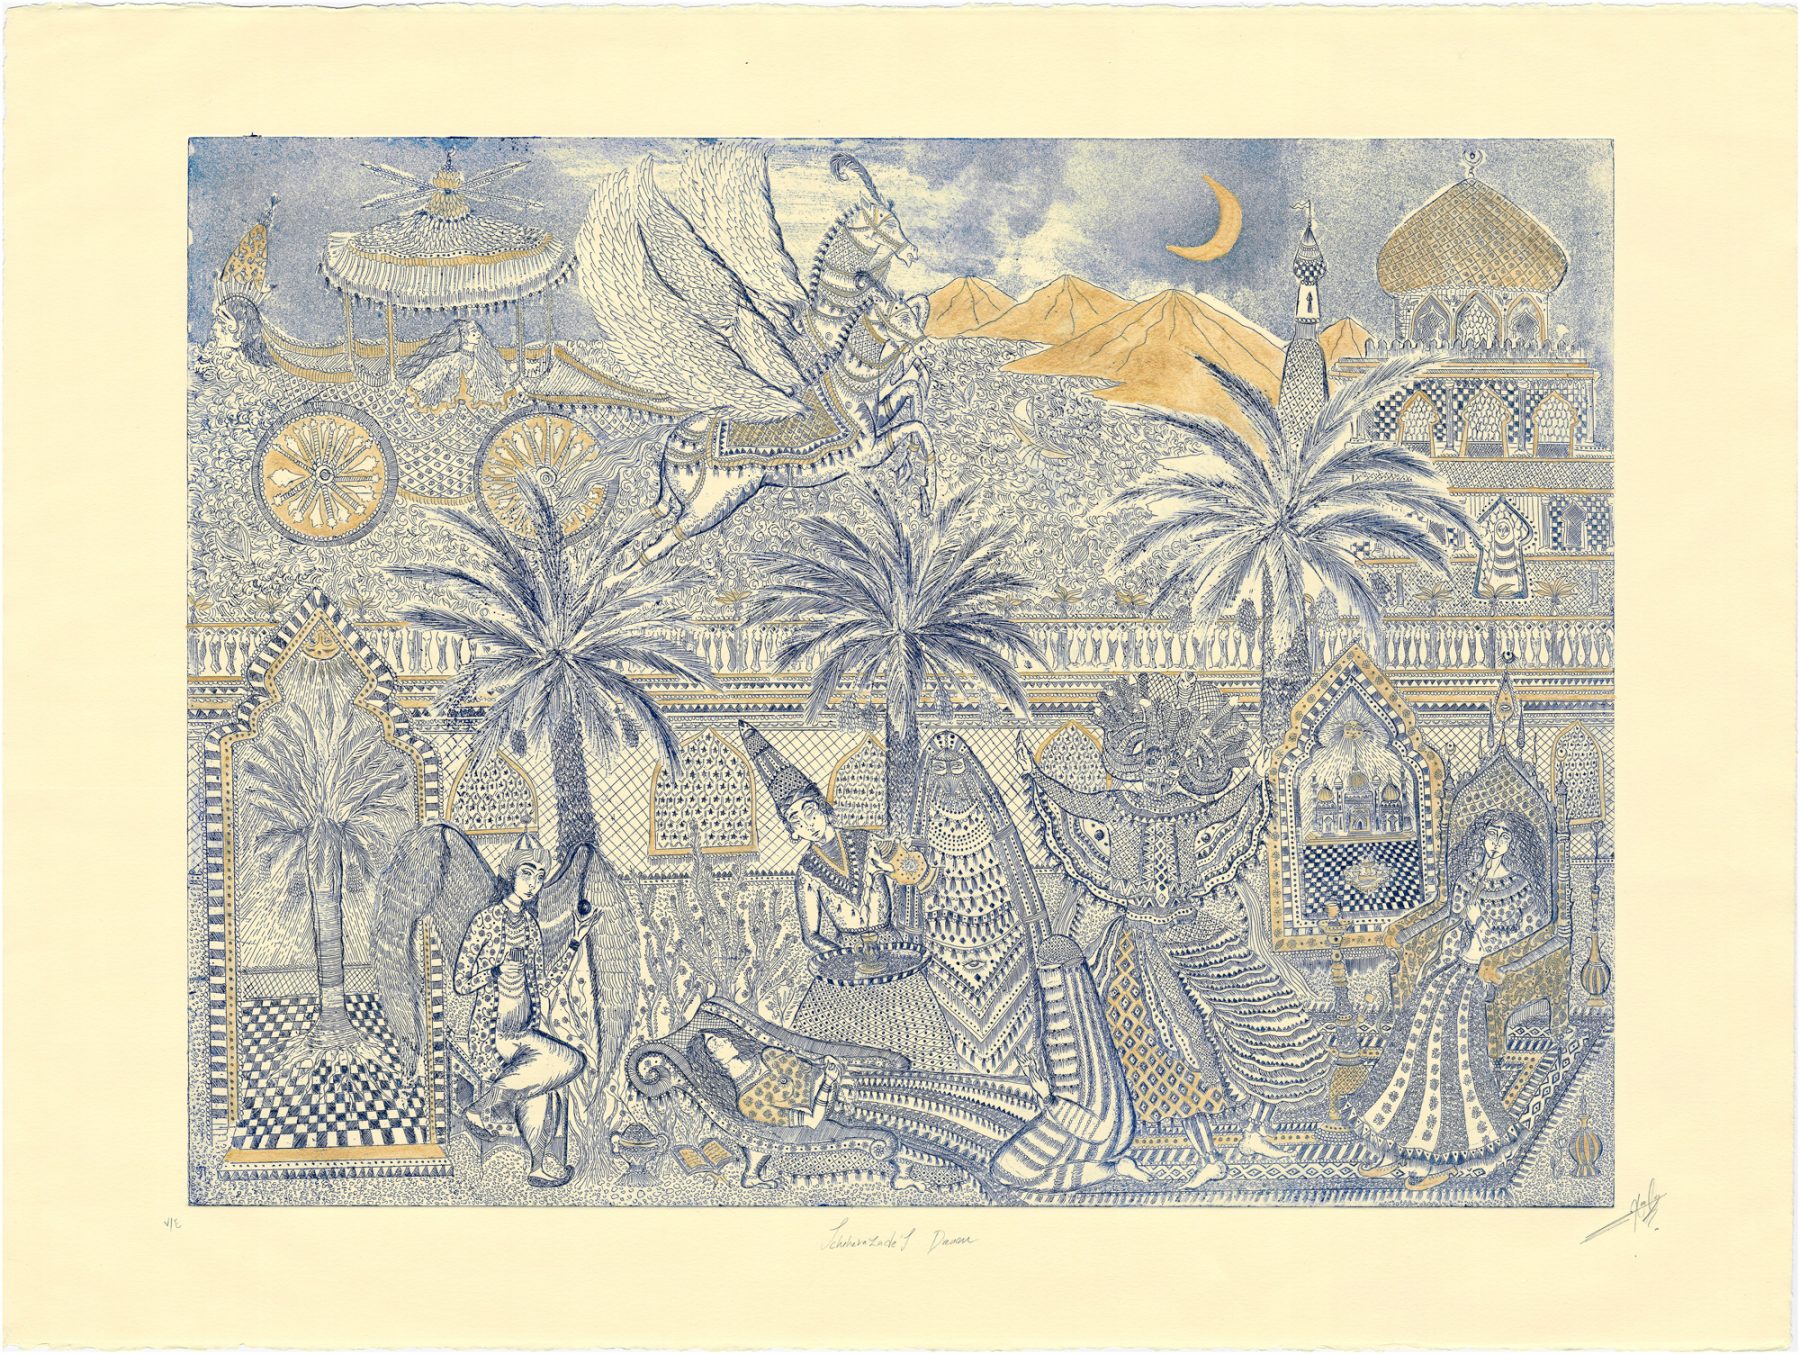 Hana Amani, Scheherazade's Dream, 2019. Intaglio and gold paint on ivory Fabriano paper, 30 x 37 inches